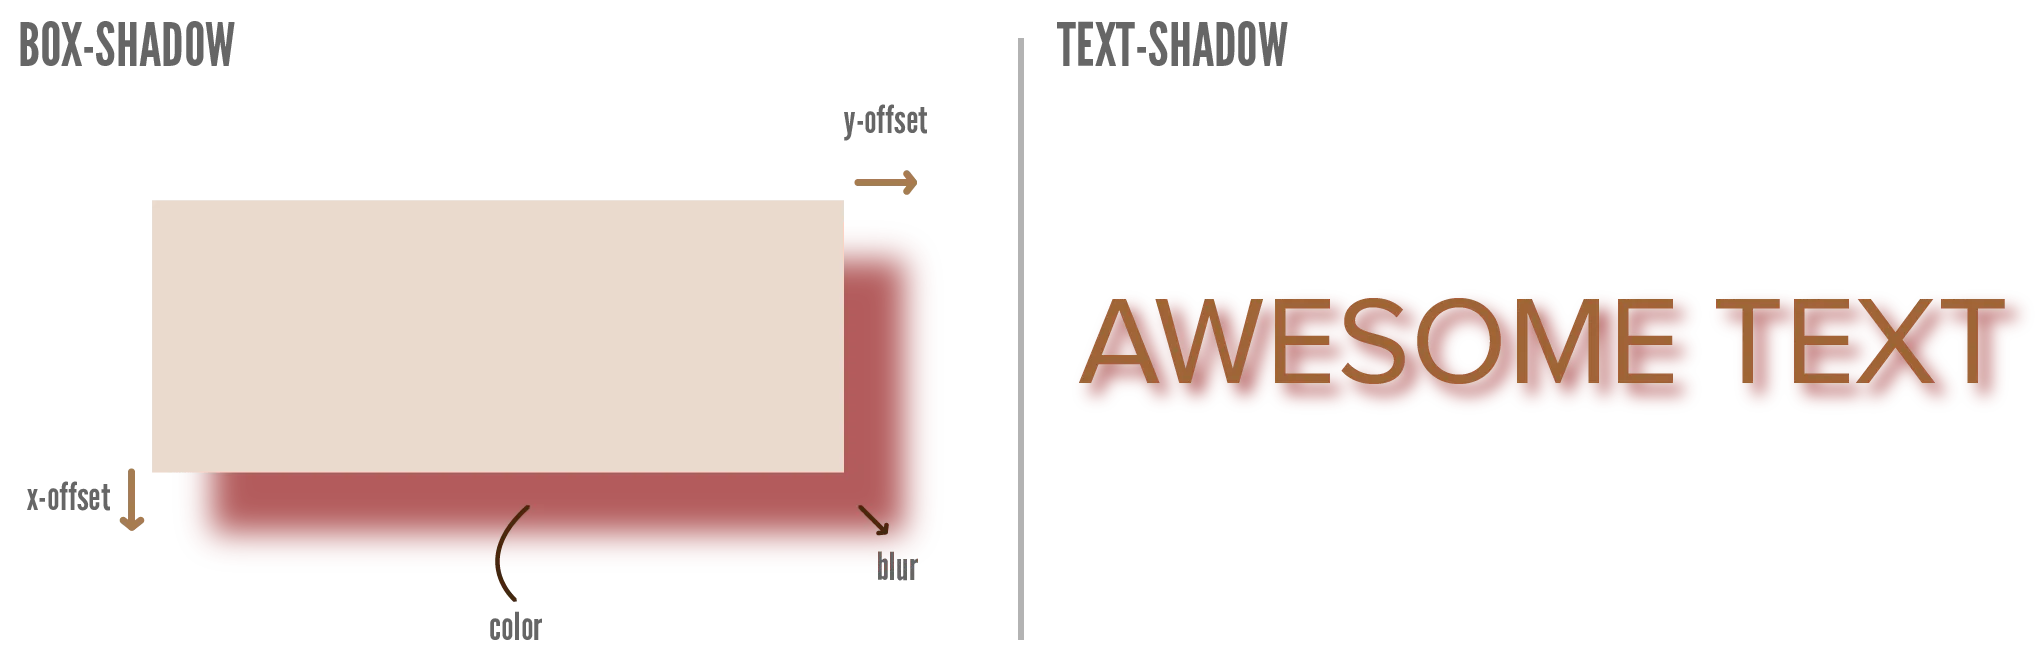 Example of box and text shadow, and how the properties change it